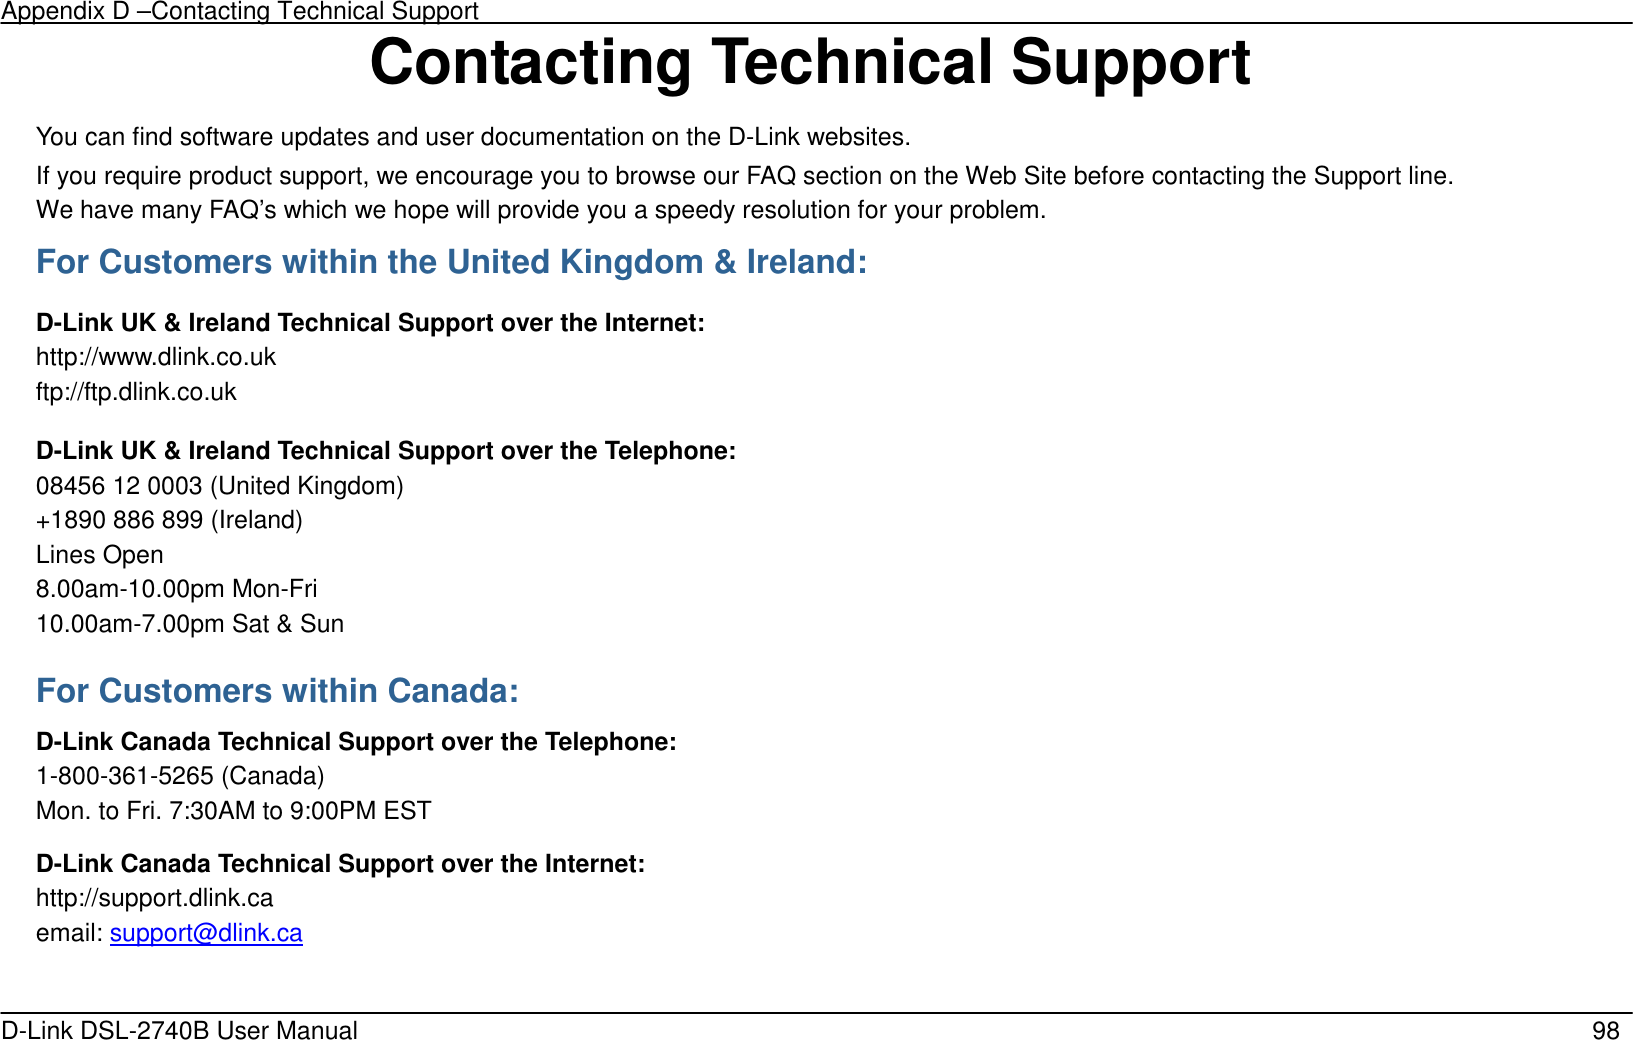 Appendix D –Contacting Technical Support   D-Link DSL-2740B User Manual                                                  98 Contacting Technical Support You can find software updates and user documentation on the D-Link websites. If you require product support, we encourage you to browse our FAQ section on the Web Site before contacting the Support line. We have many FAQ’s which we hope will provide you a speedy resolution for your problem. For Customers within the United Kingdom &amp; Ireland: D-Link UK &amp; Ireland Technical Support over the Internet: http://www.dlink.co.uk ftp://ftp.dlink.co.uk D-Link UK &amp; Ireland Technical Support over the Telephone: 08456 12 0003 (United Kingdom) +1890 886 899 (Ireland) Lines Open 8.00am-10.00pm Mon-Fri 10.00am-7.00pm Sat &amp; Sun For Customers within Canada: D-Link Canada Technical Support over the Telephone: 1-800-361-5265 (Canada) Mon. to Fri. 7:30AM to 9:00PM EST D-Link Canada Technical Support over the Internet: http://support.dlink.ca email: support@dlink.ca  